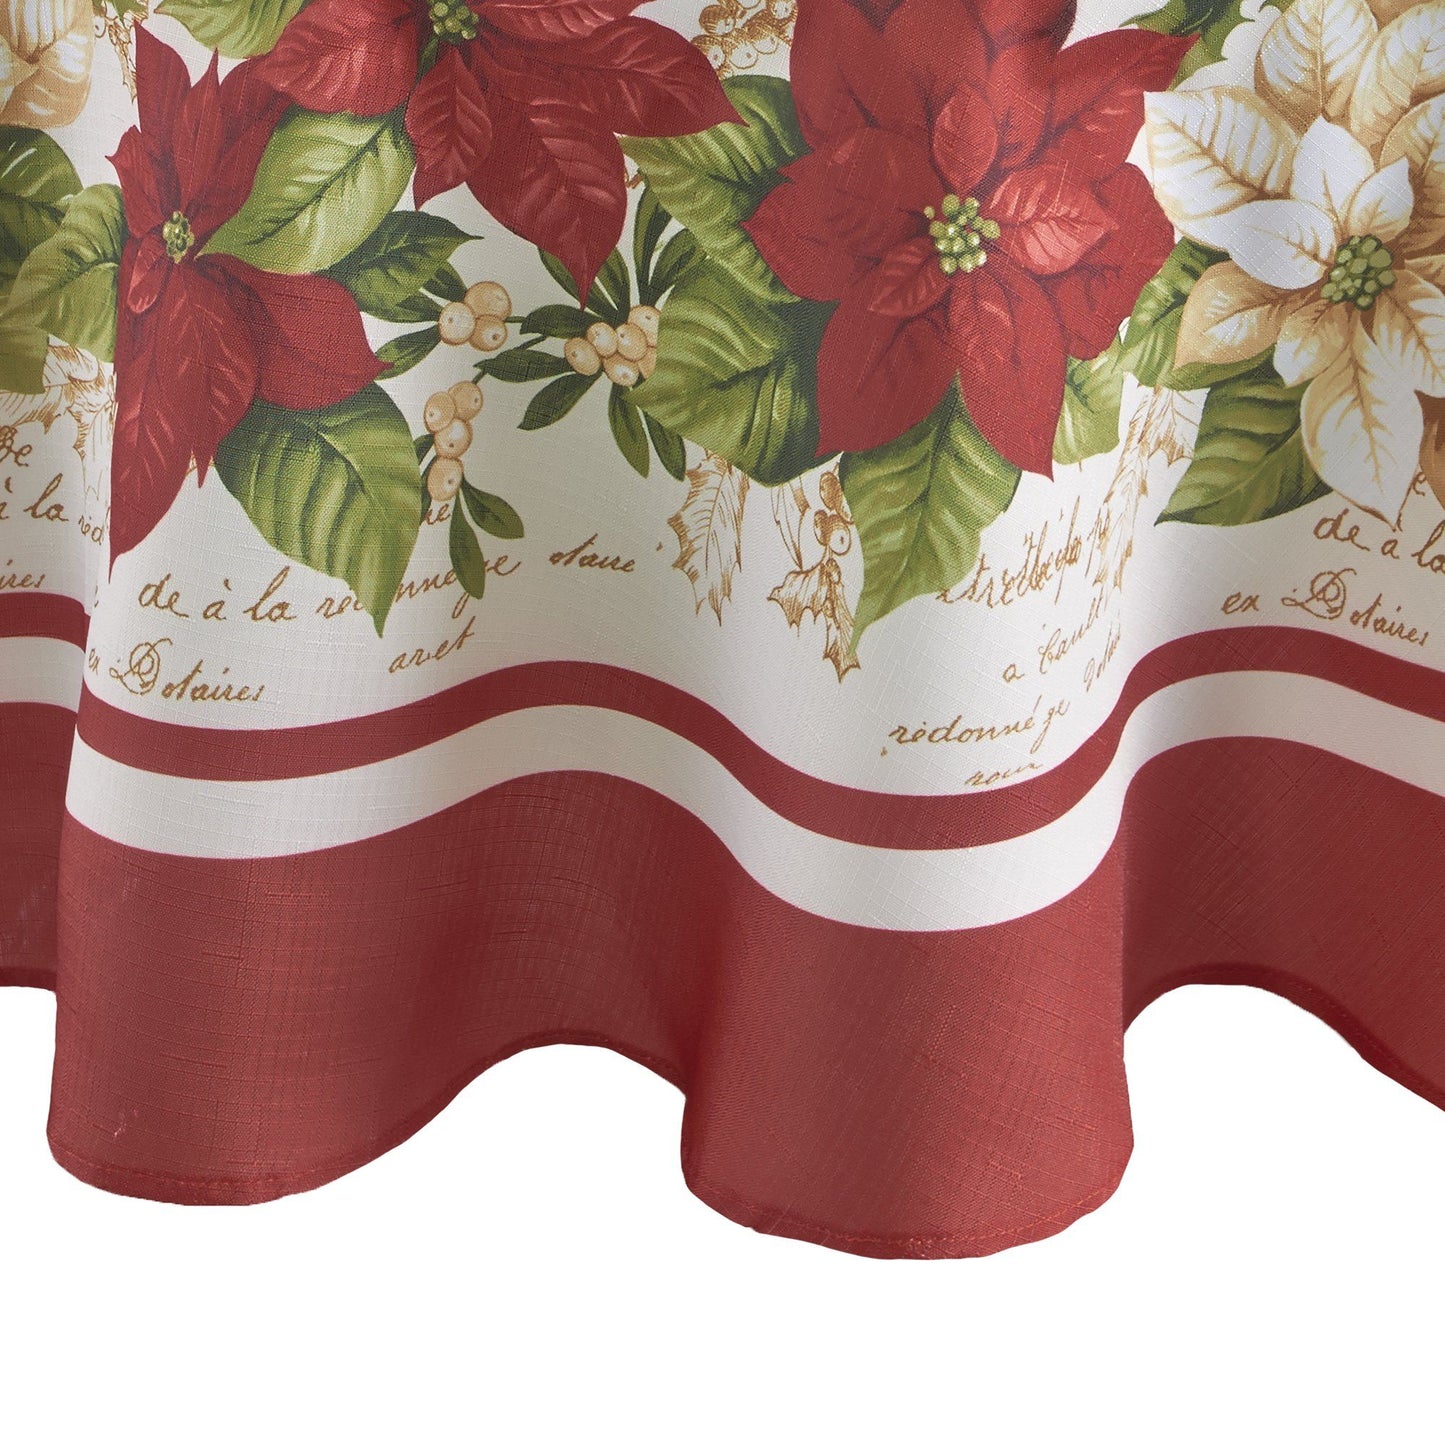 Red and White Poinsettias Tablecloth